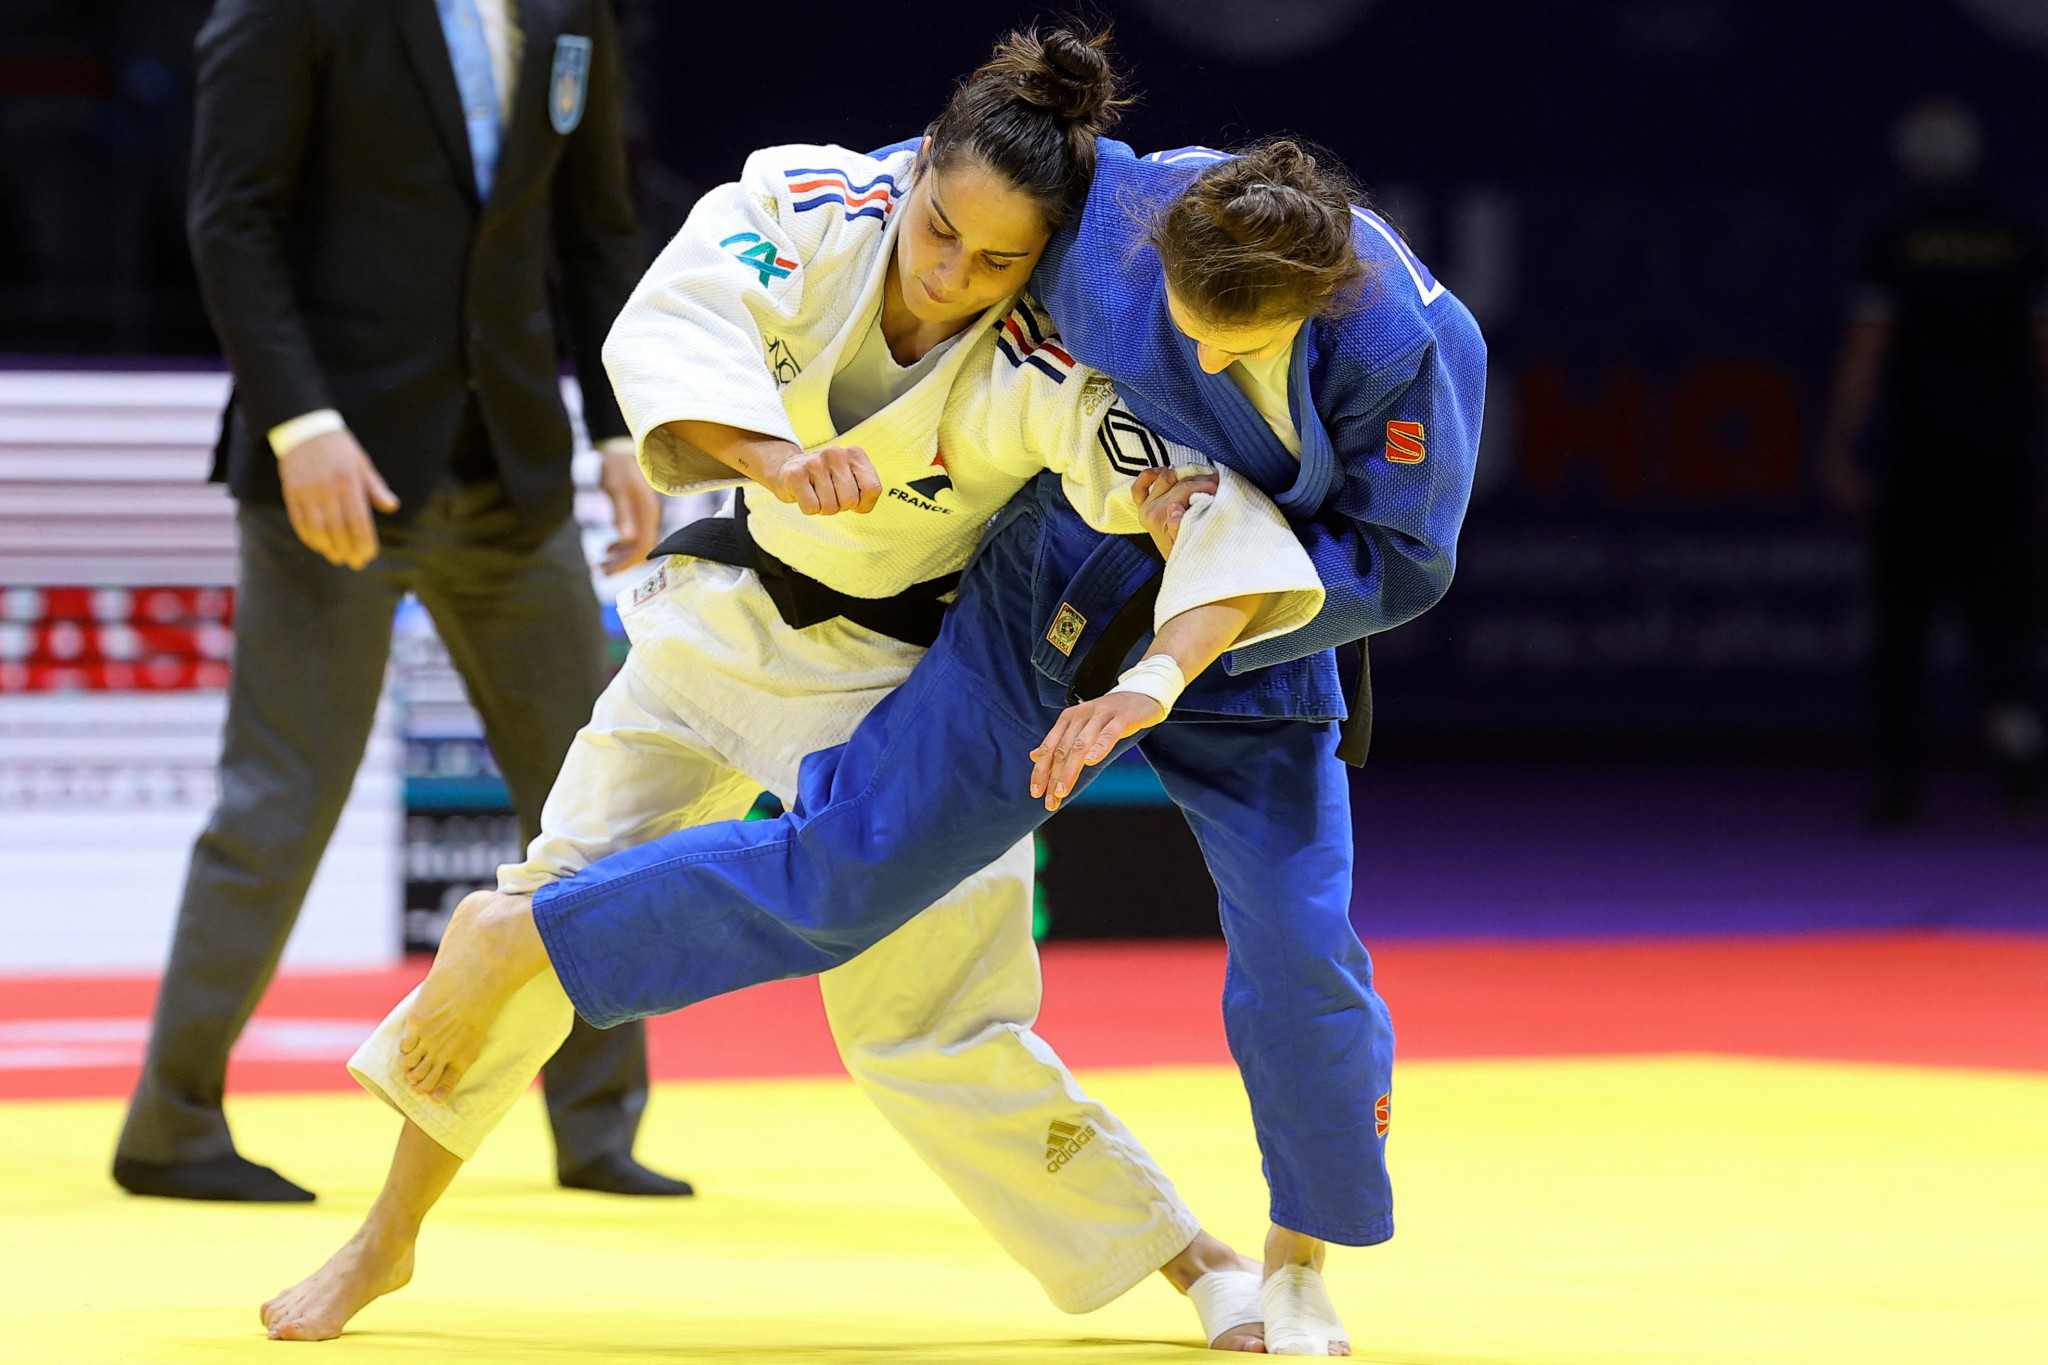 Russian judo leader hails IJF for efforts to "build bridges" between countries